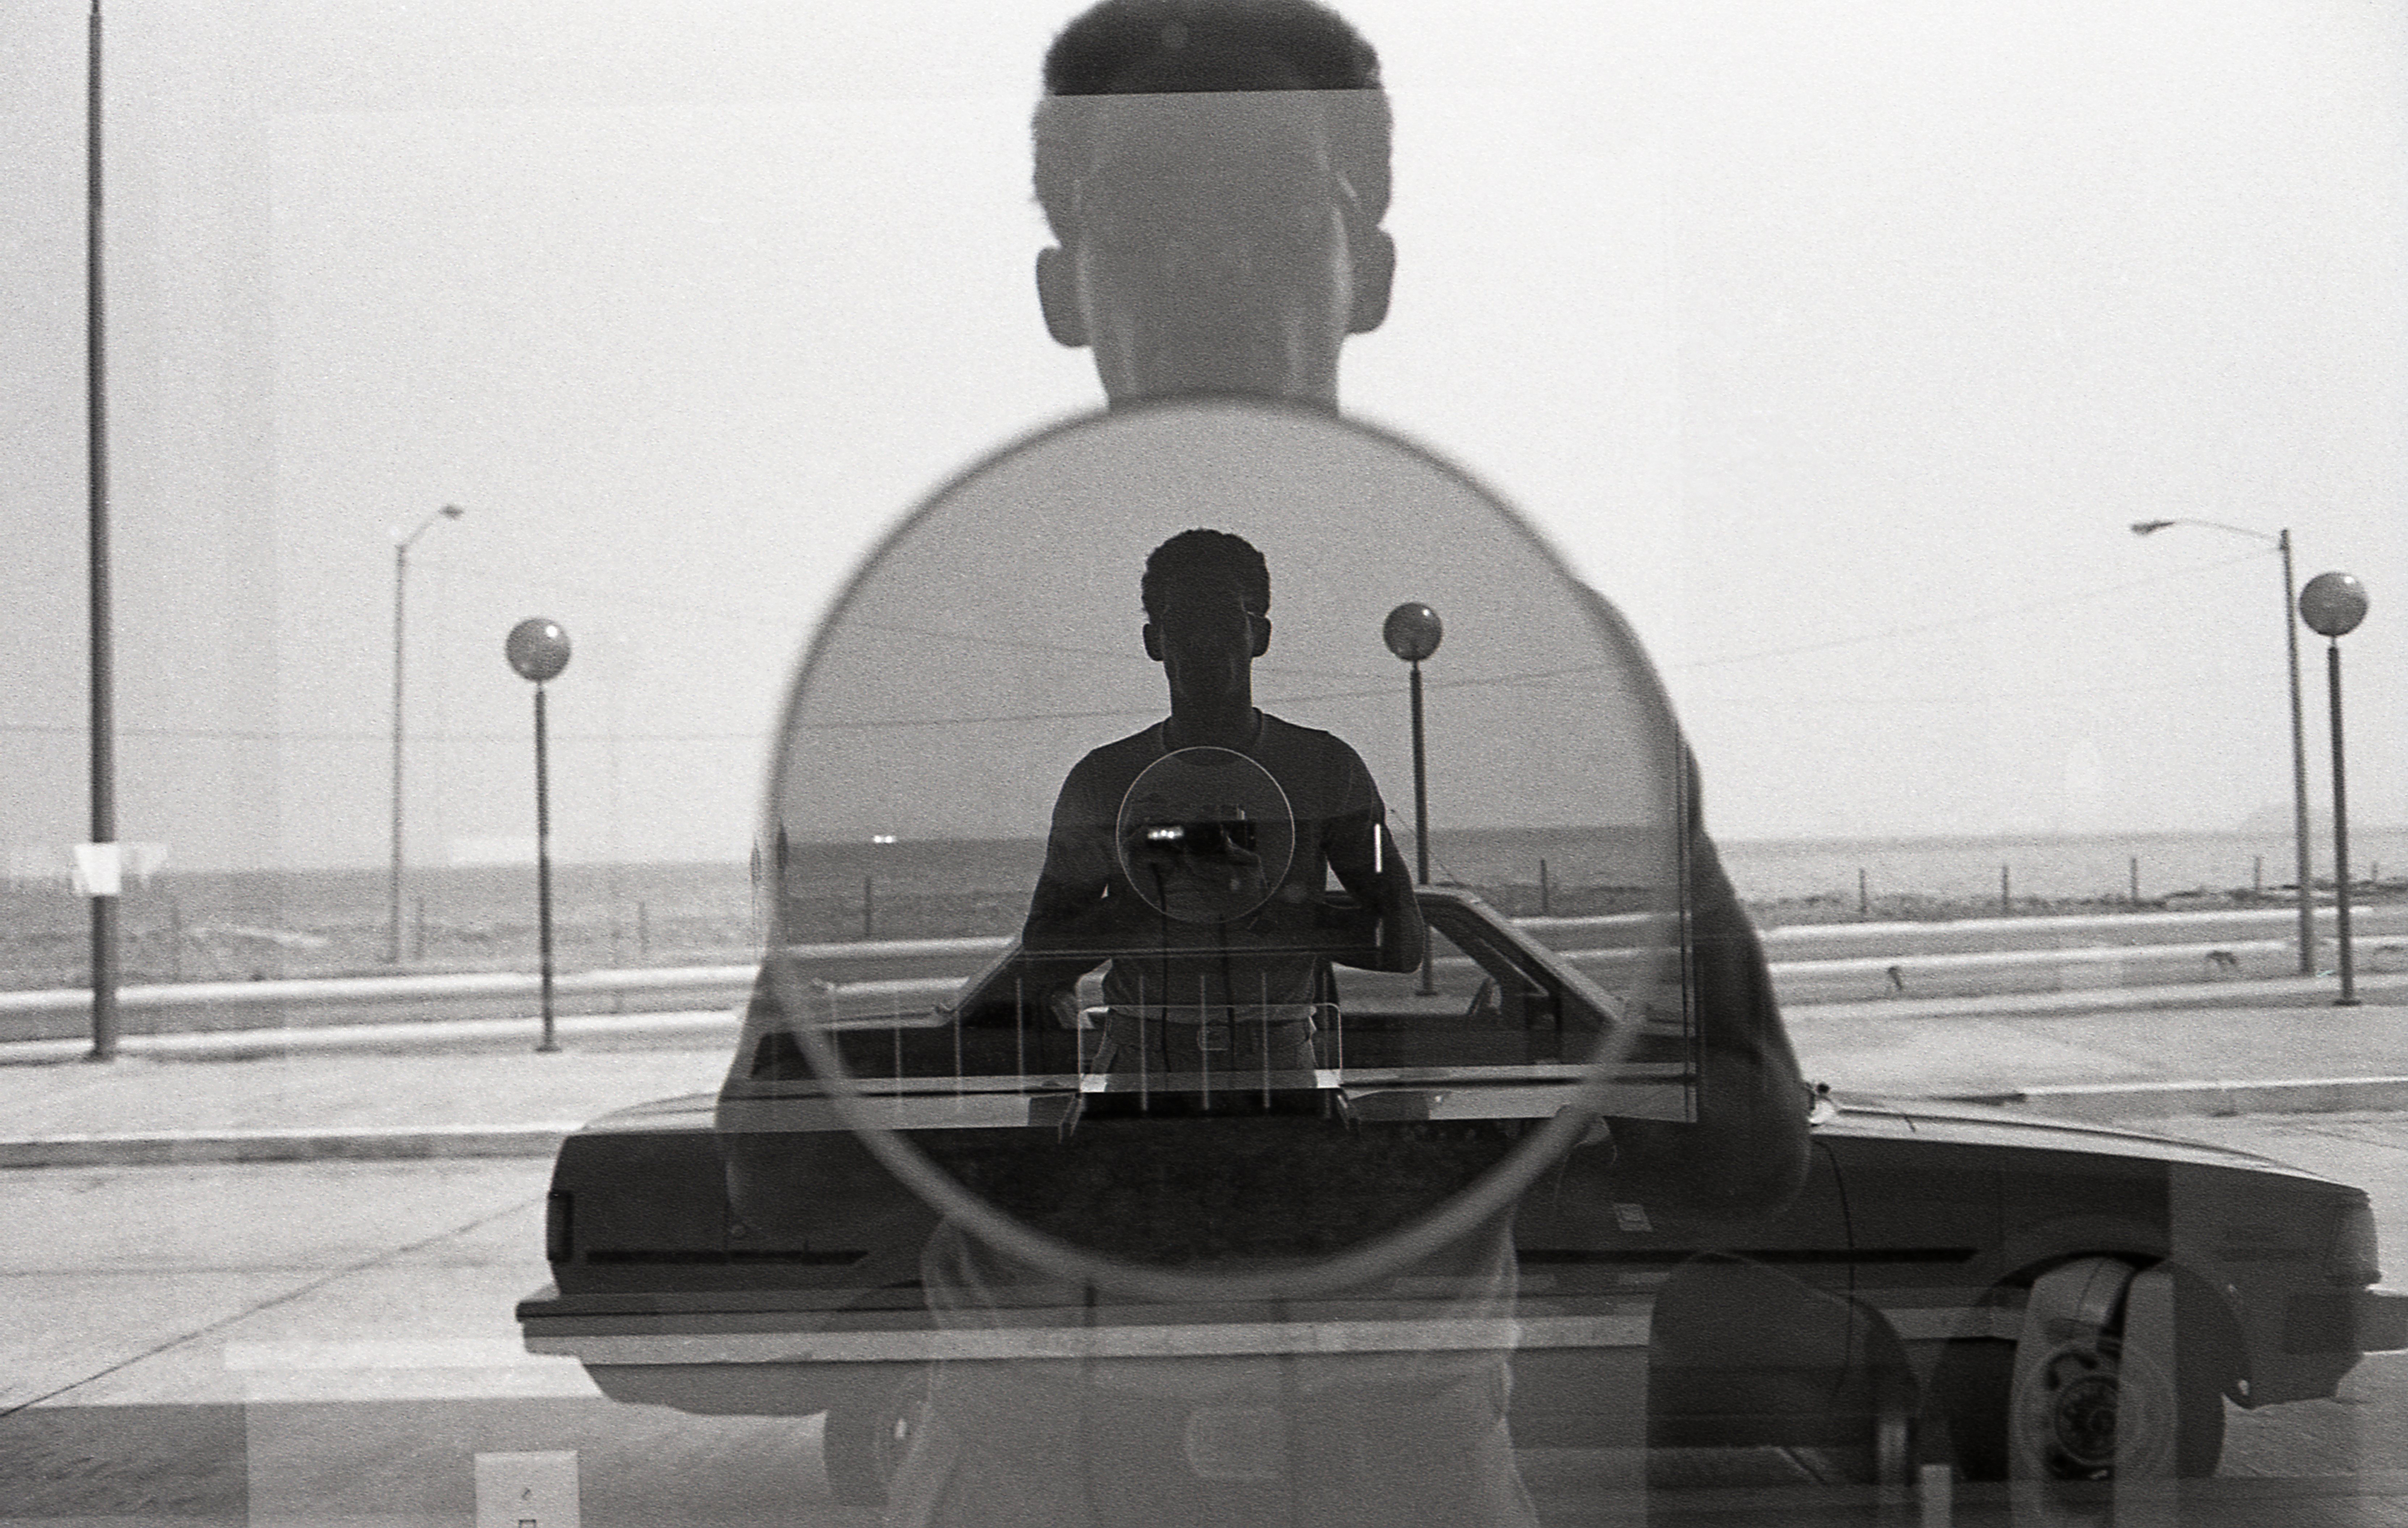 Black-and-white self-portrait photograph of a man and his reflection through a window